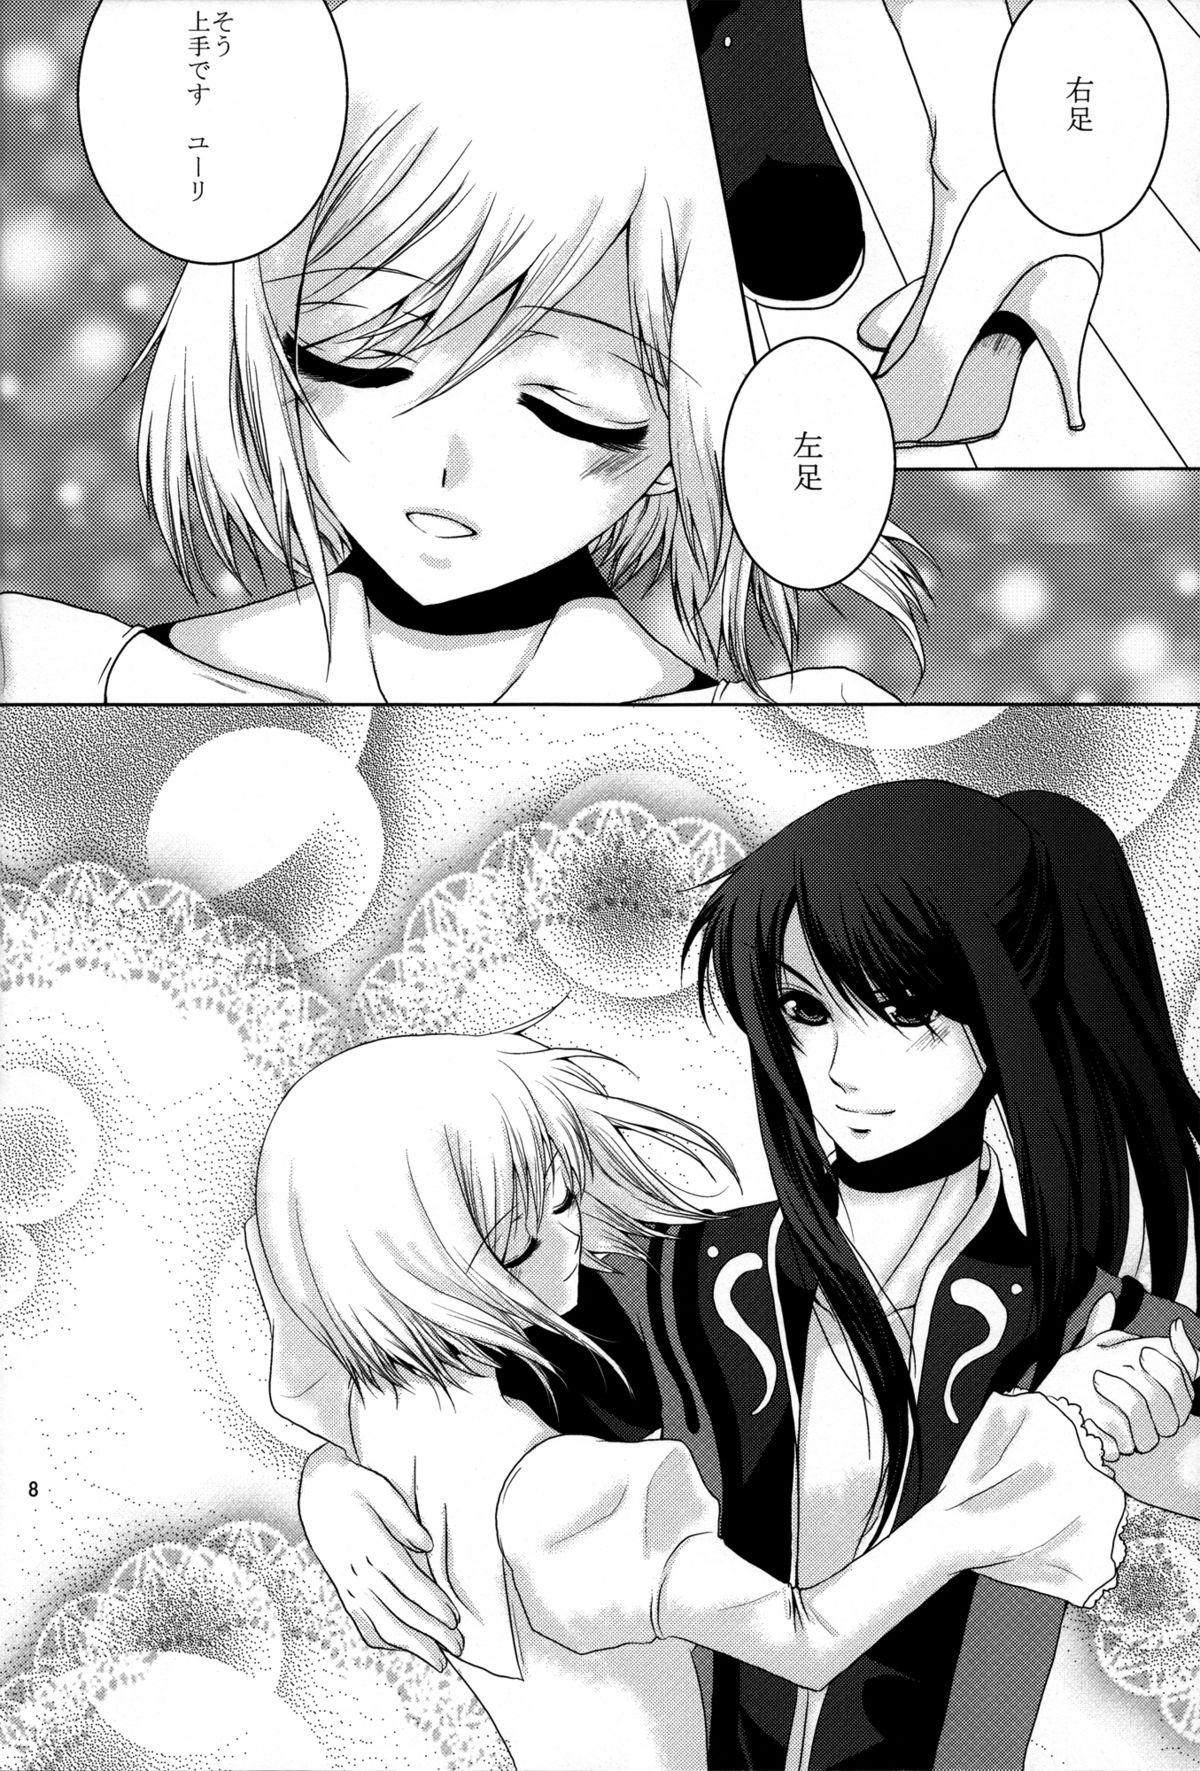 Car Etoile - Tales of vesperia Hot Naked Girl - Page 8